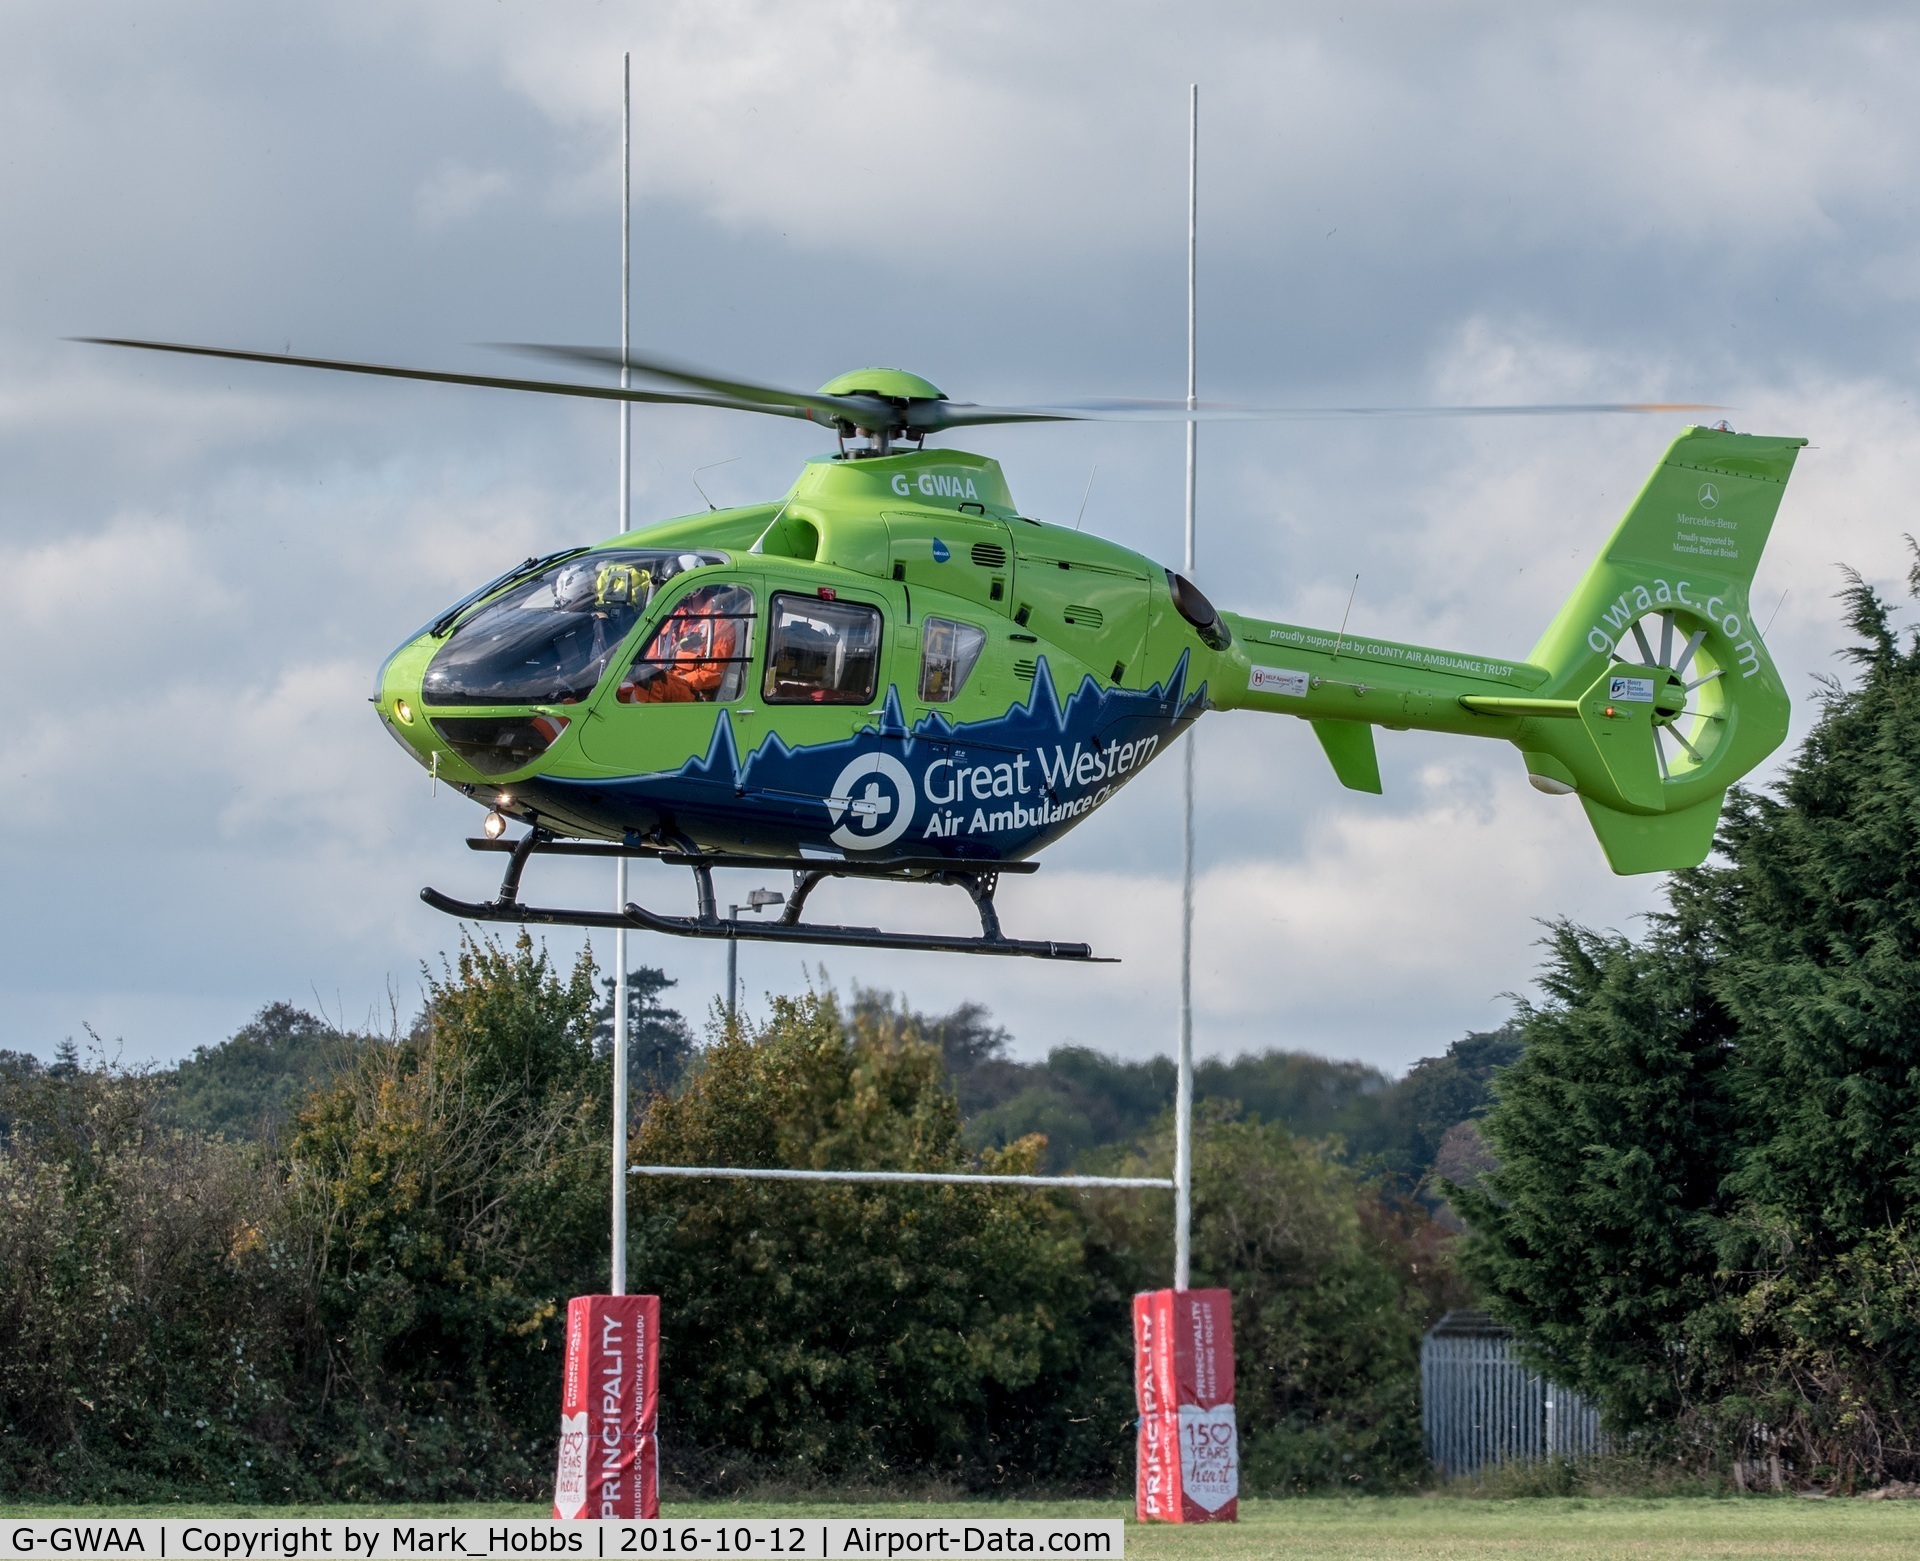 G-GWAA, 2001 Eurocopter EC-135T-2 C/N 0174, Great Western Air Ambulance carrying out an urgent blood transfer to ambulance at Chepstow Rugby club.